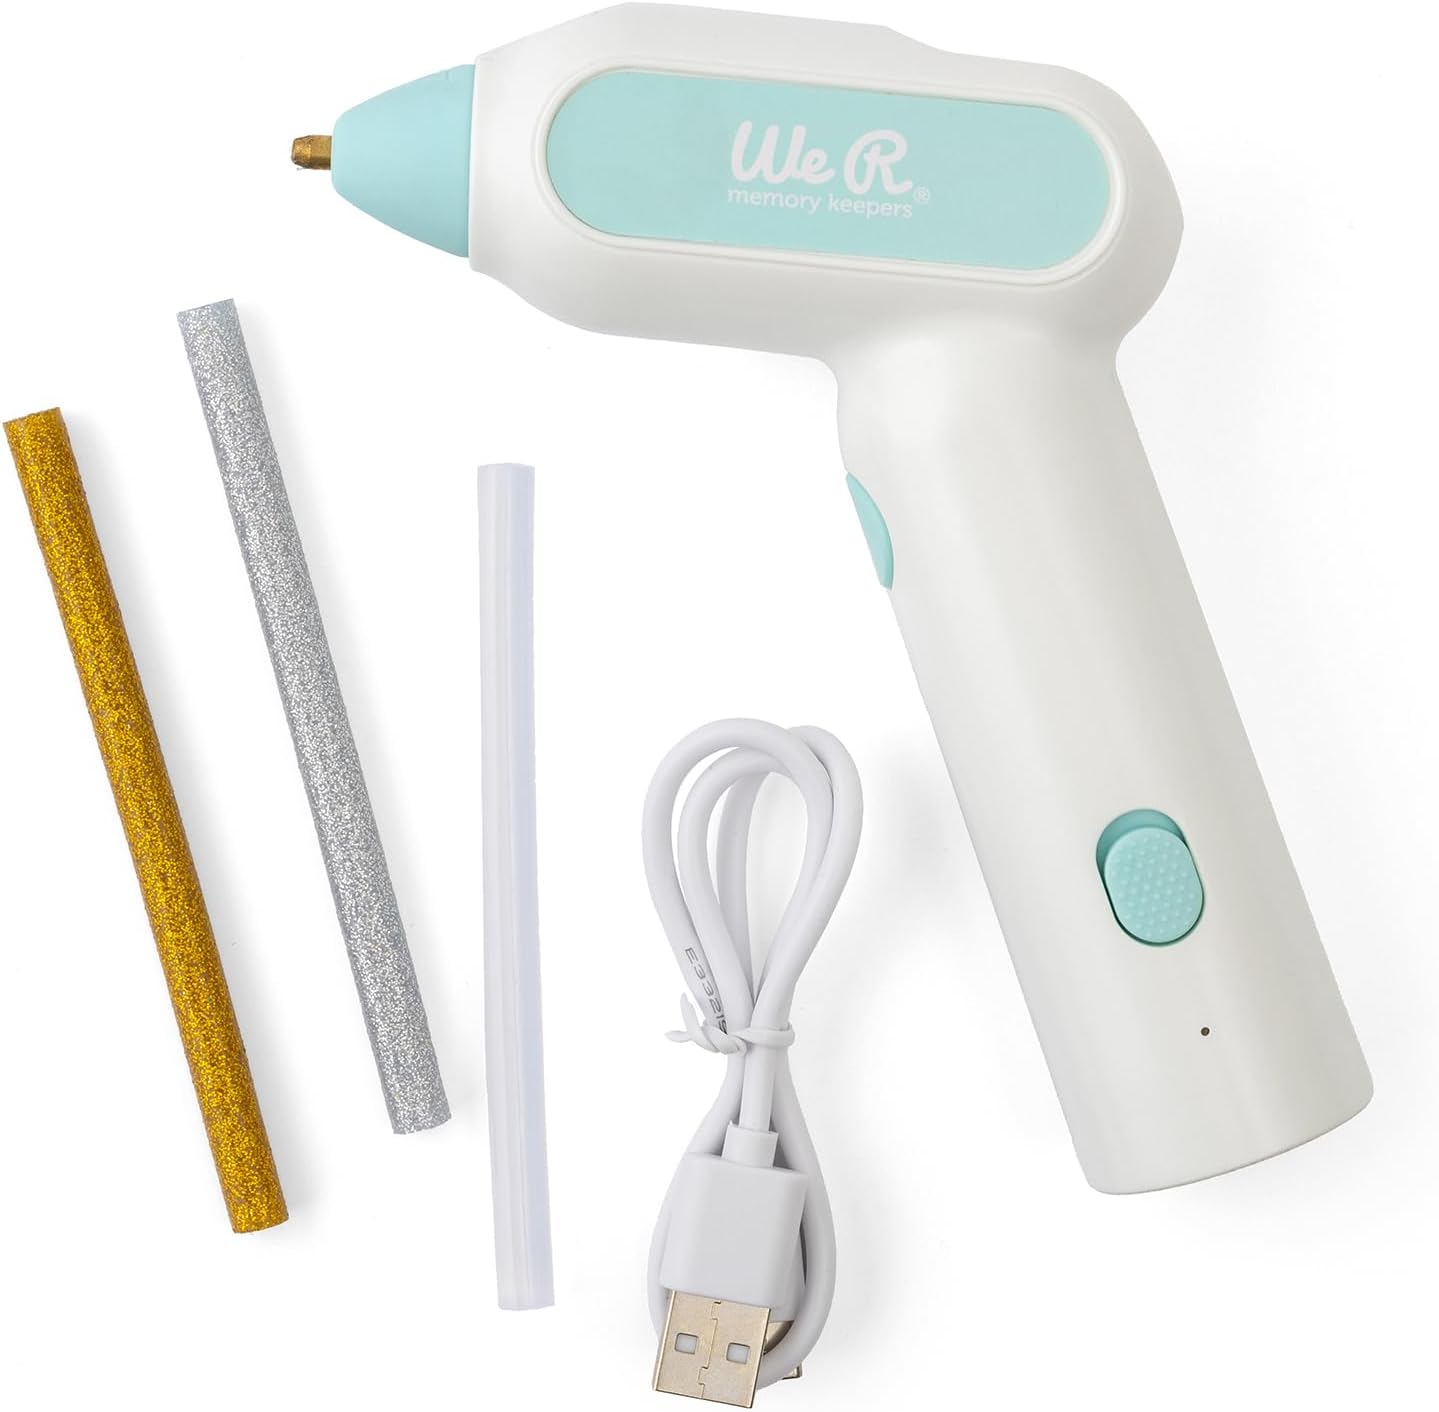 We R Makers Creative Flow Glue Gun with three assorted glue sticks and power cord